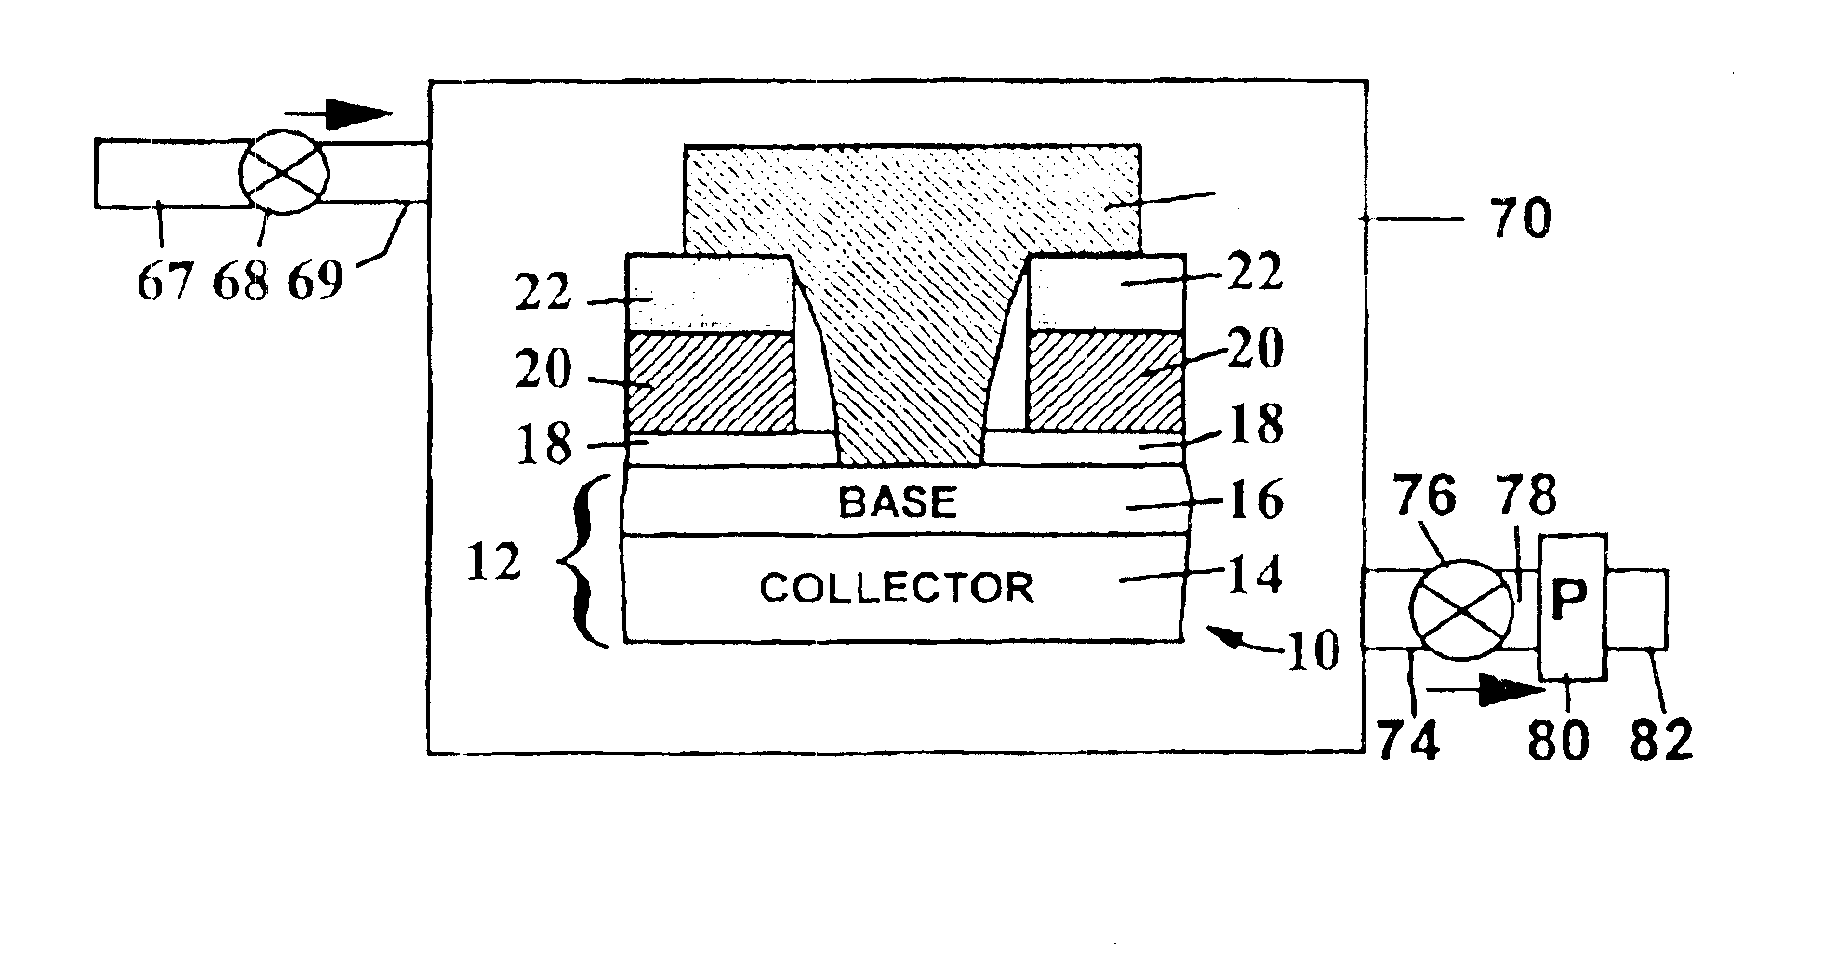 Low defect pre-emitter and pre-base oxide etch for bipolar transistors and related tooling